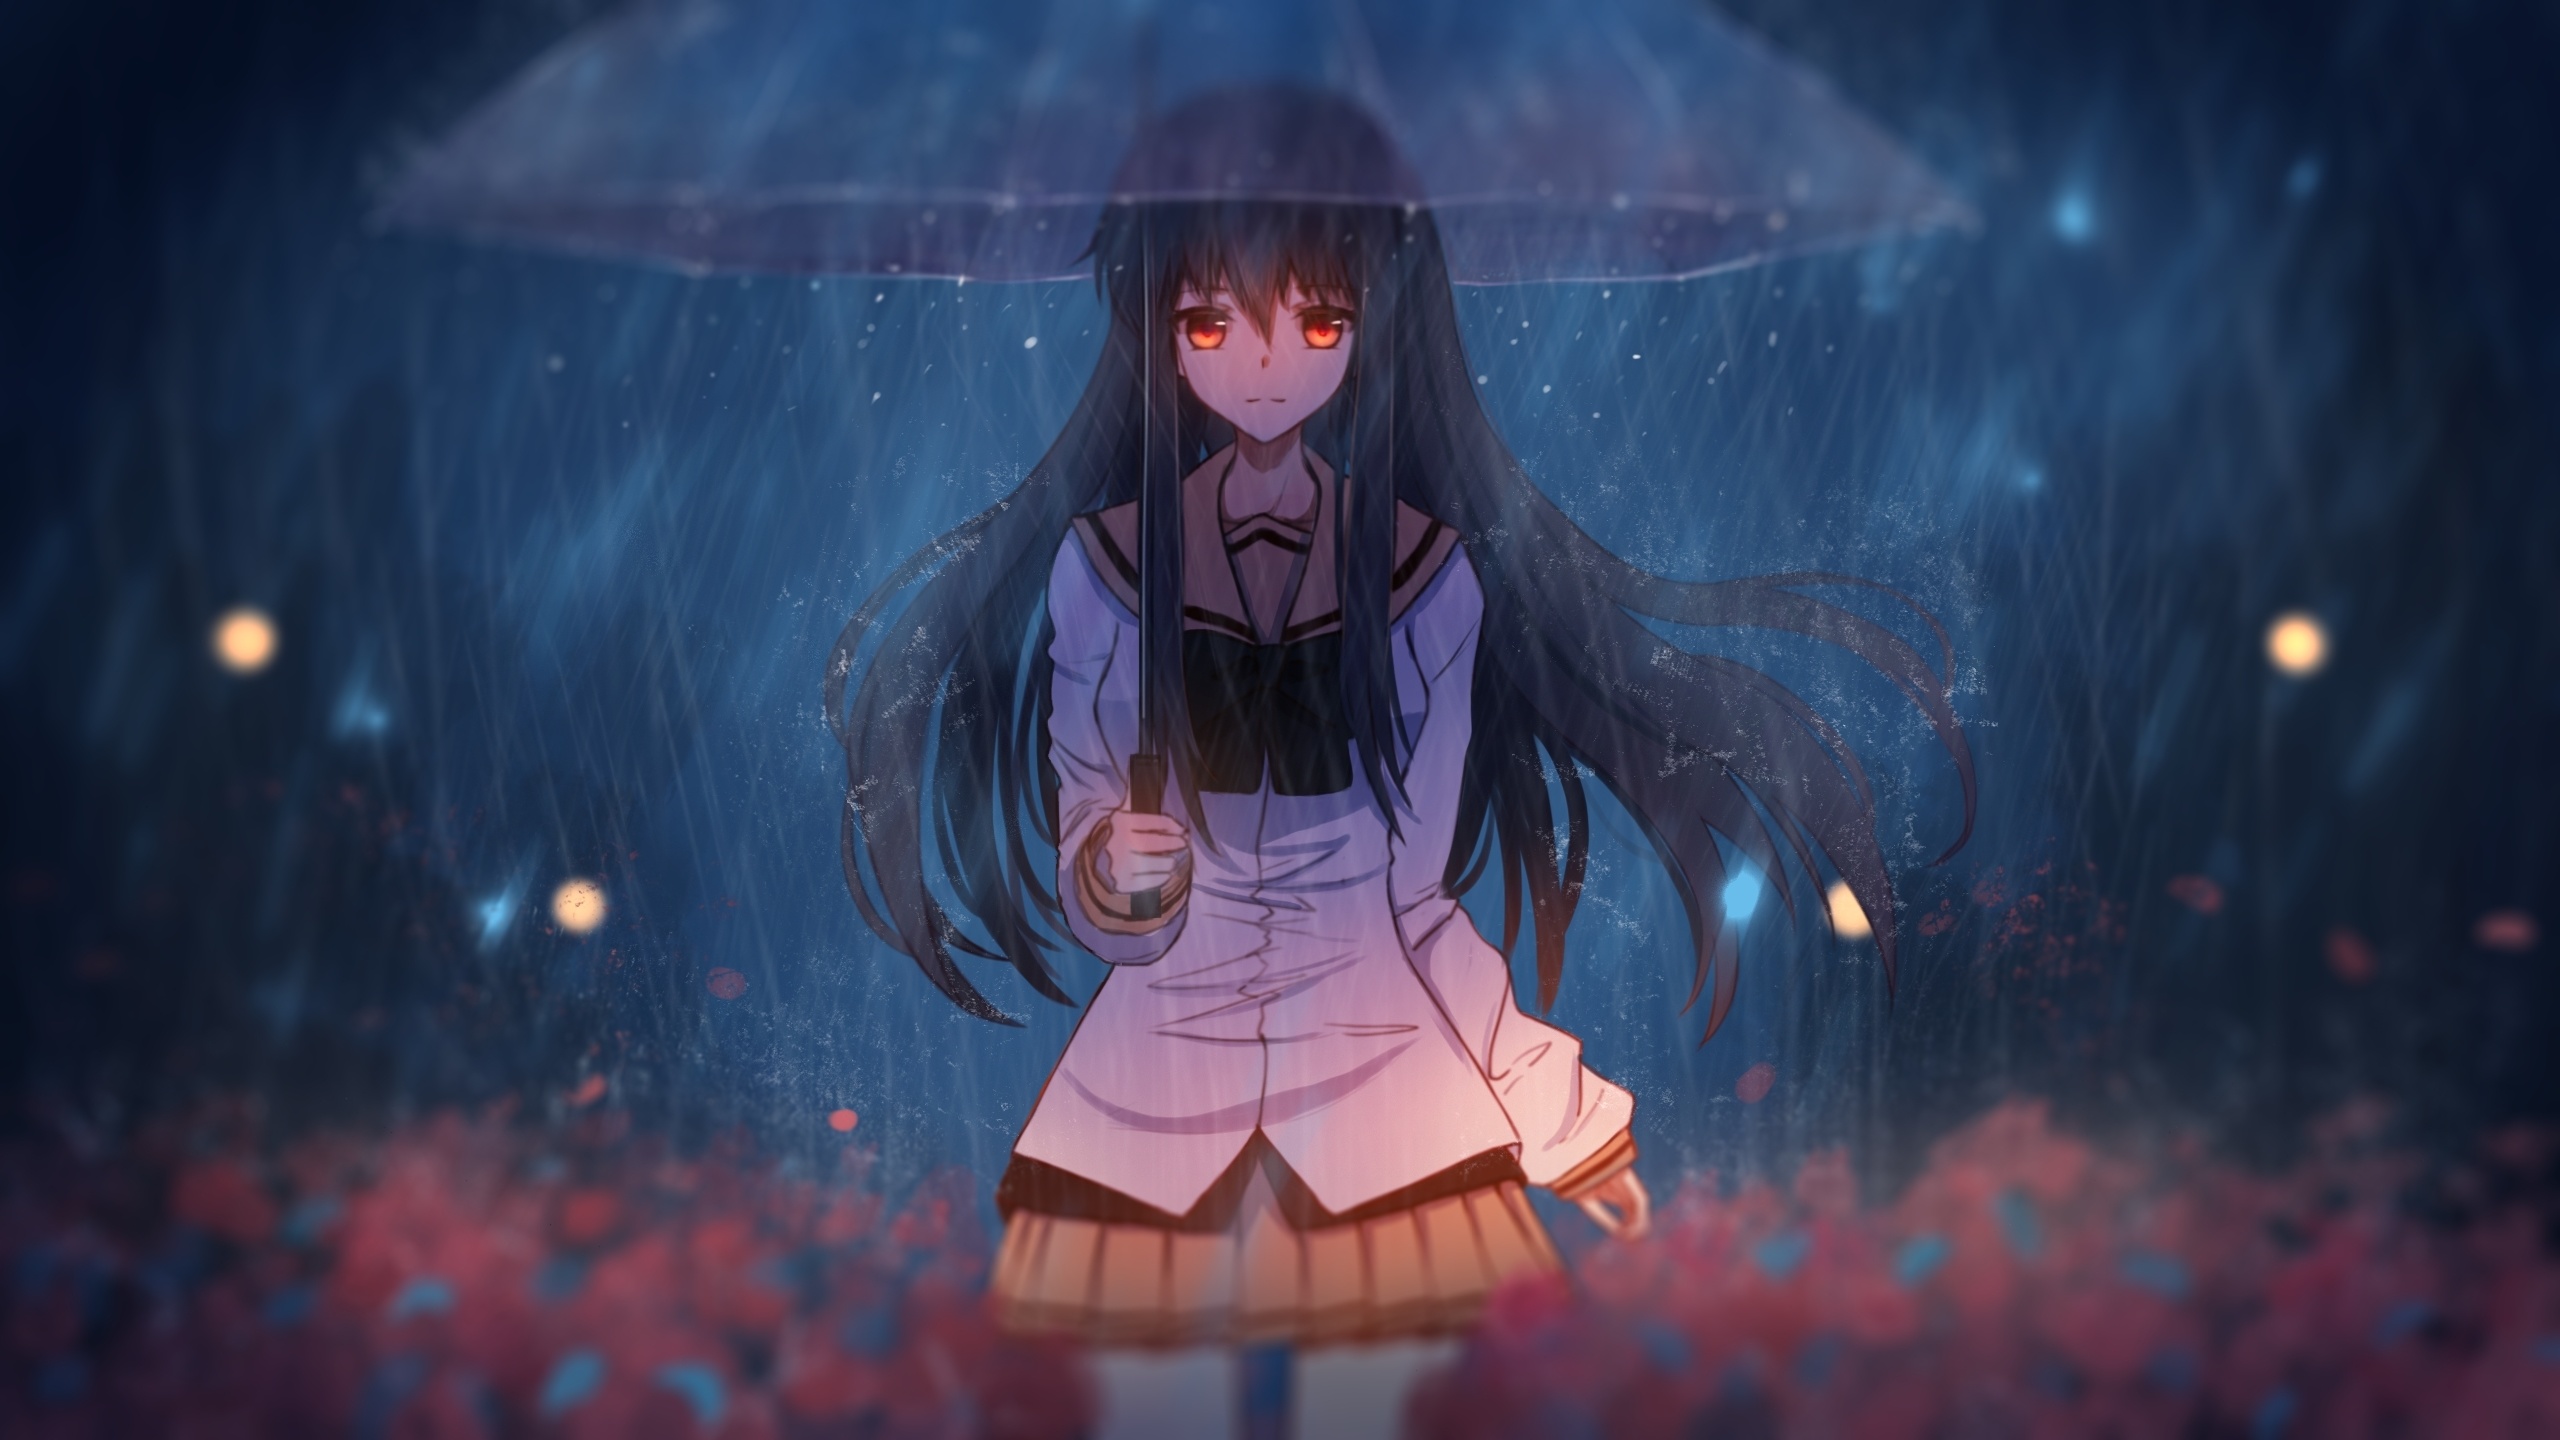 Download wallpaper 2560x1600 anime girl in rain, with umbrella, art, dual  wide 16:10 2560x1600 hd background, 8992